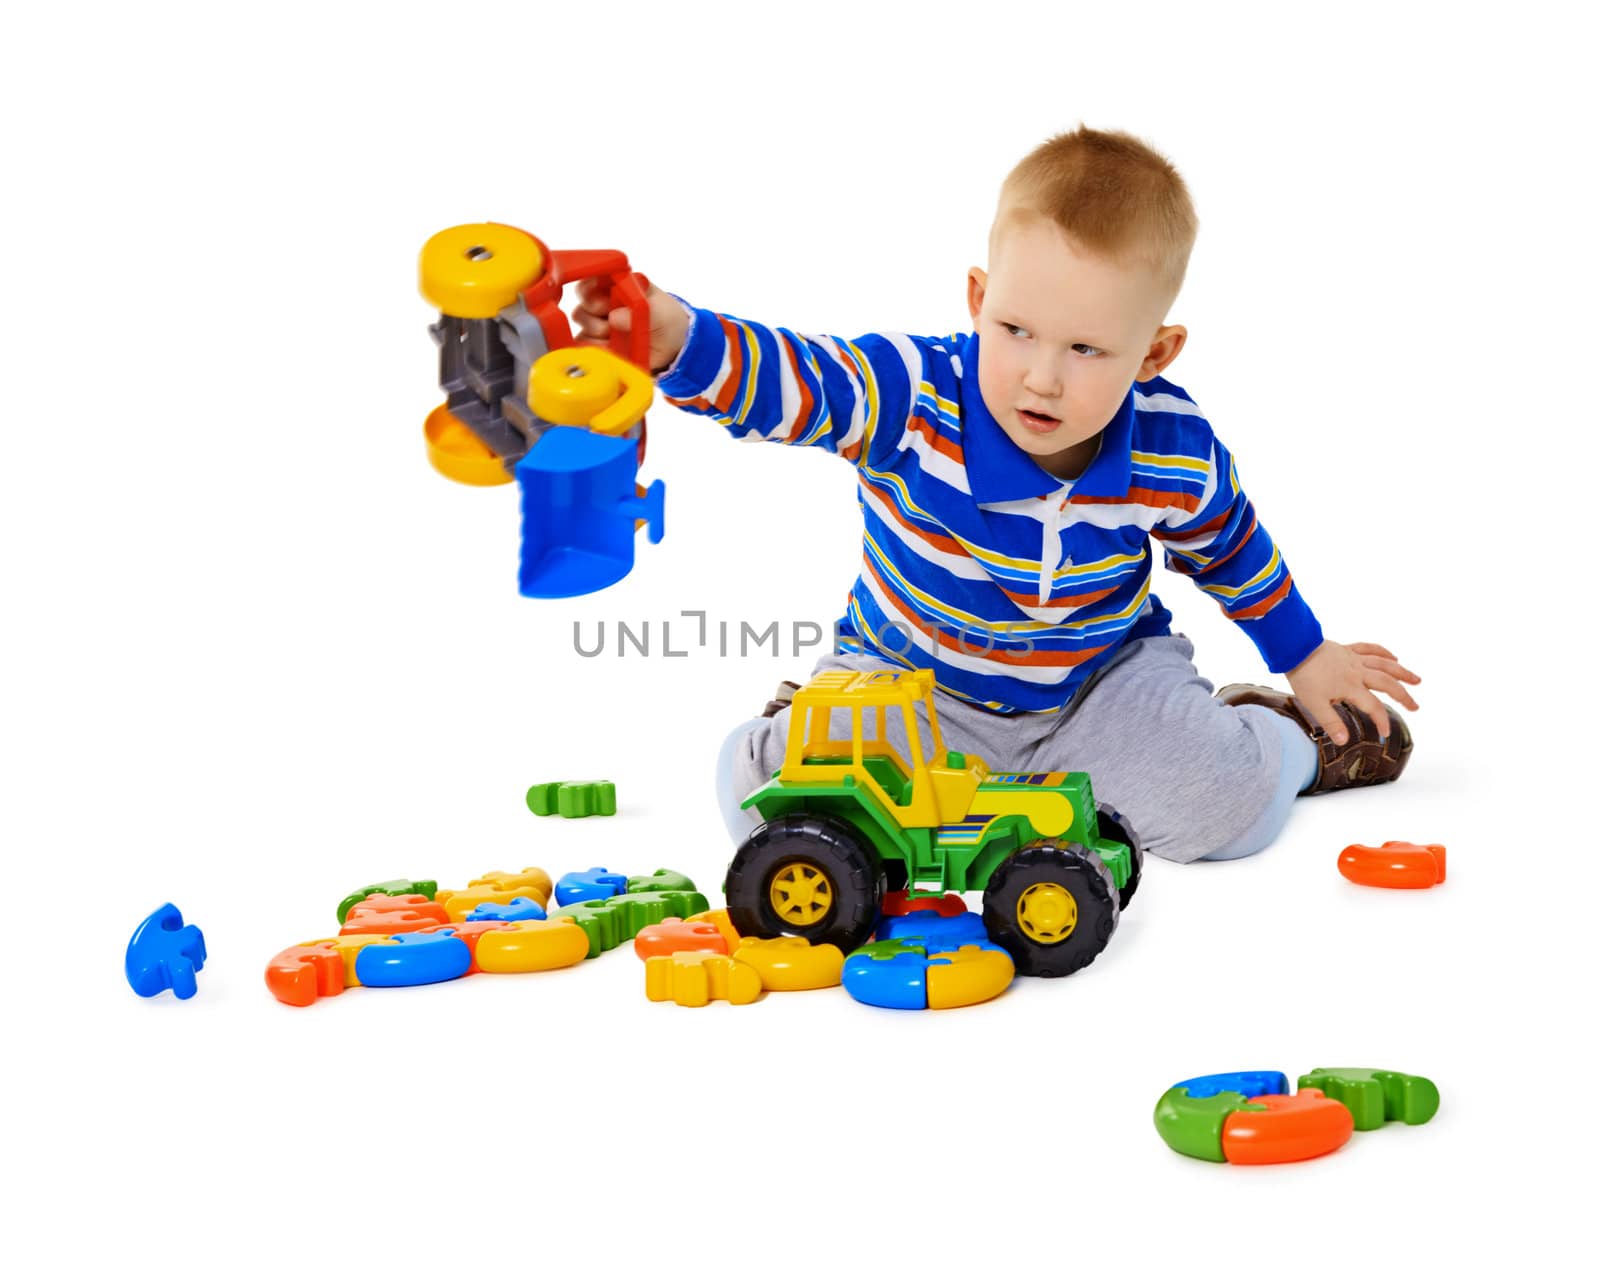 Little boy playing actively with plastic toys sitting on the floor